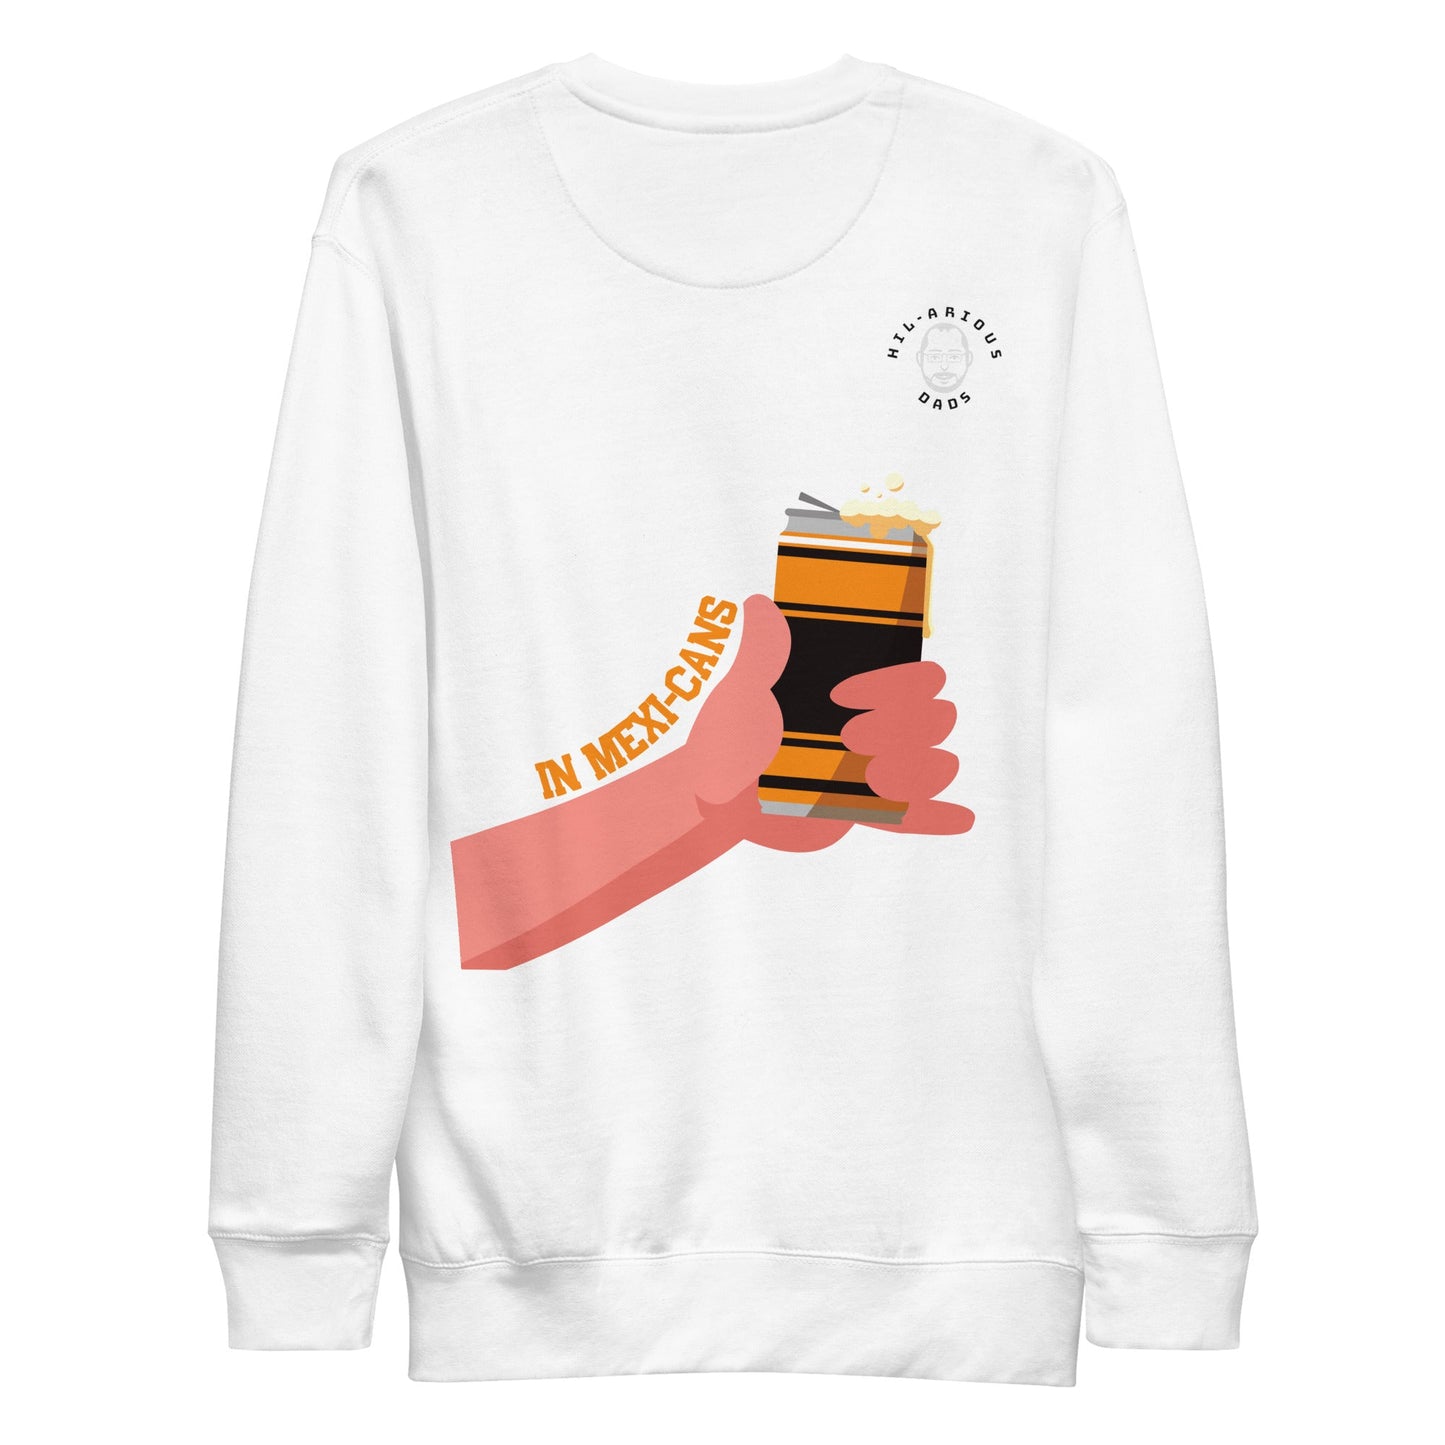 How do they serve beer on Cinco De Mayo?-Sweatshirt - Hil-arious Dads